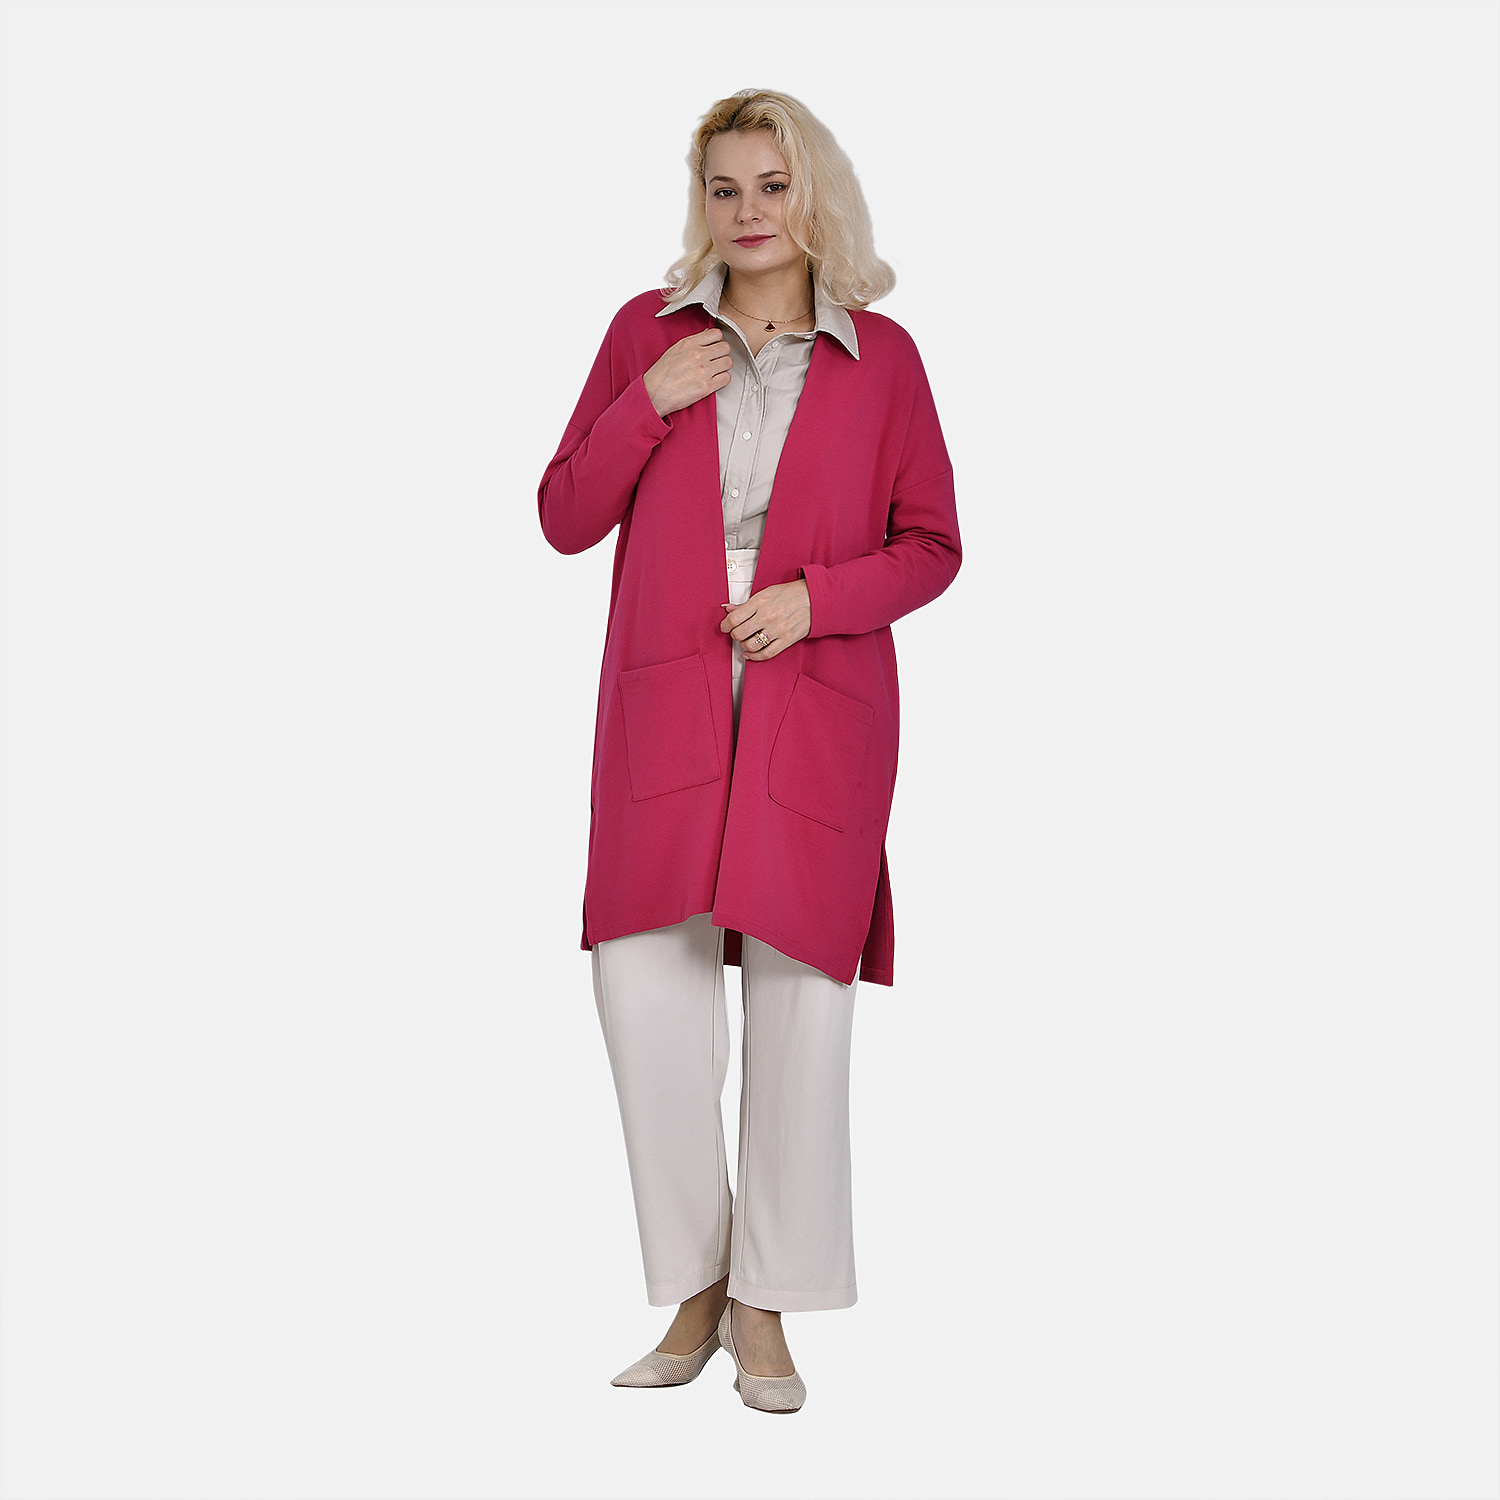 Tamsy 60% Cotton Blend Jersey Cardigan (One Size, 8-20) - Fuchsia